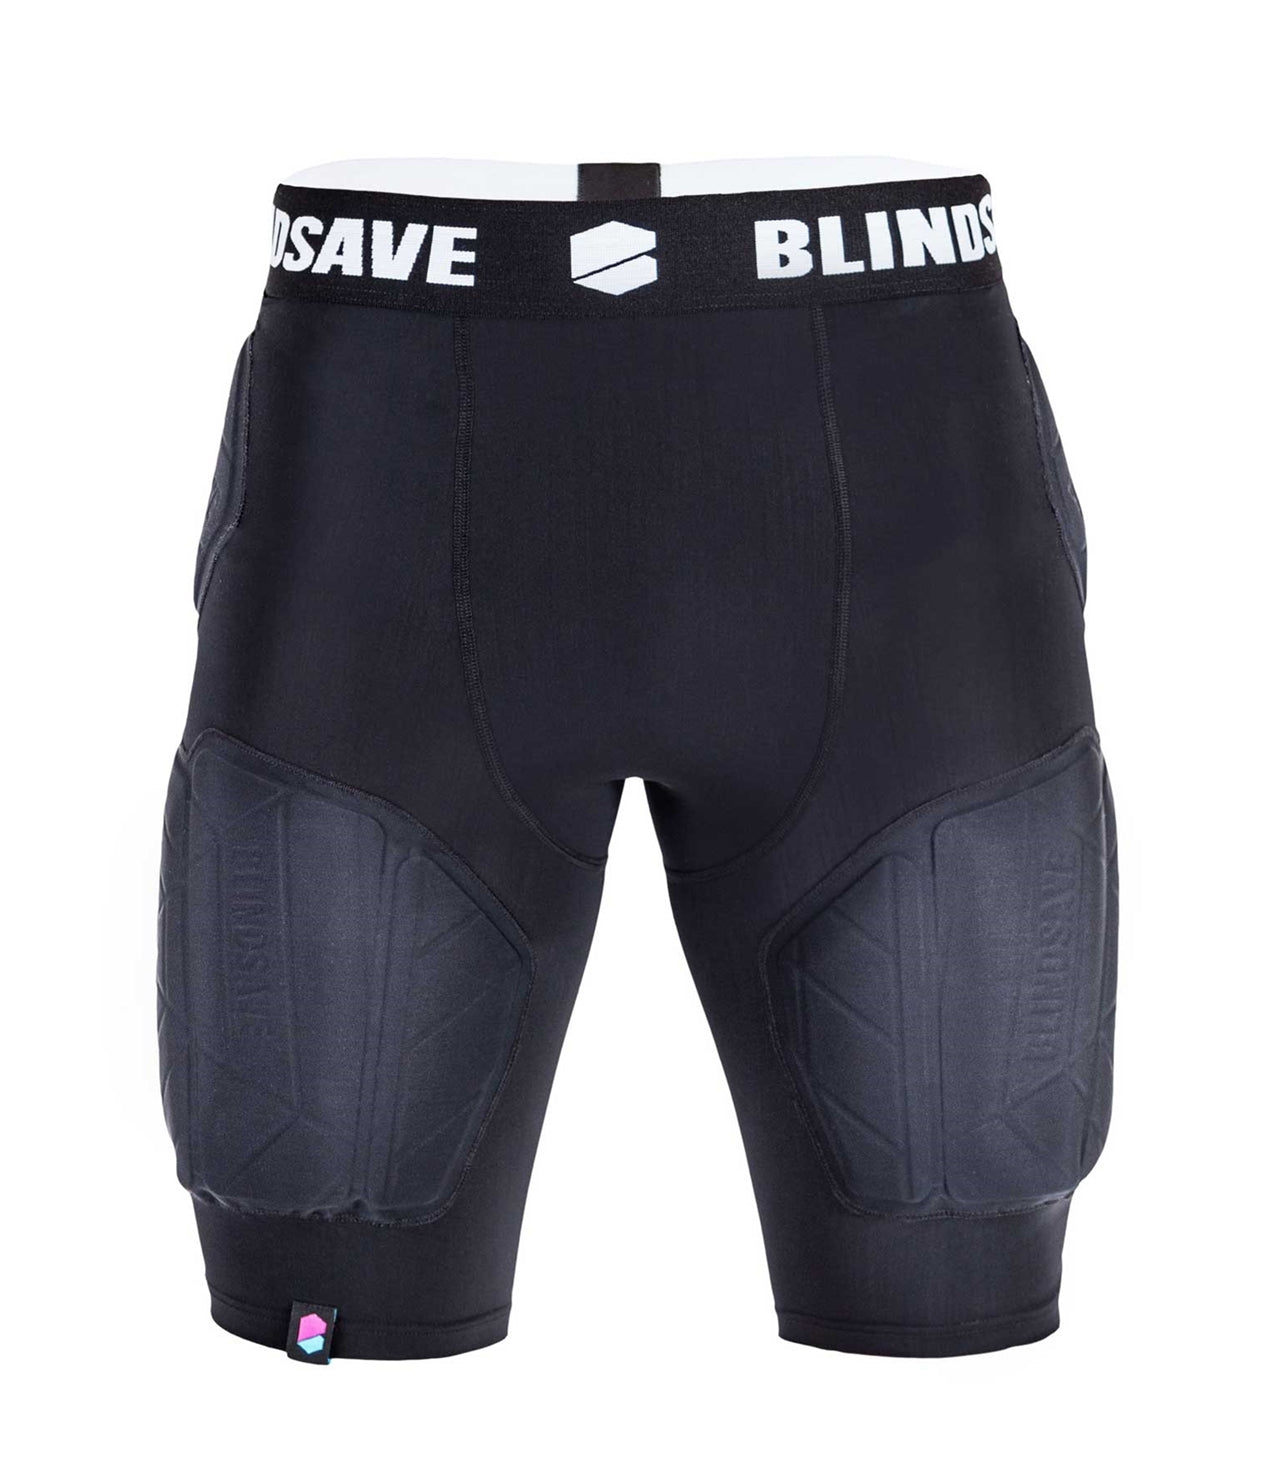 Protective shorts + cup (White edition) – BLINDSAVE floorball